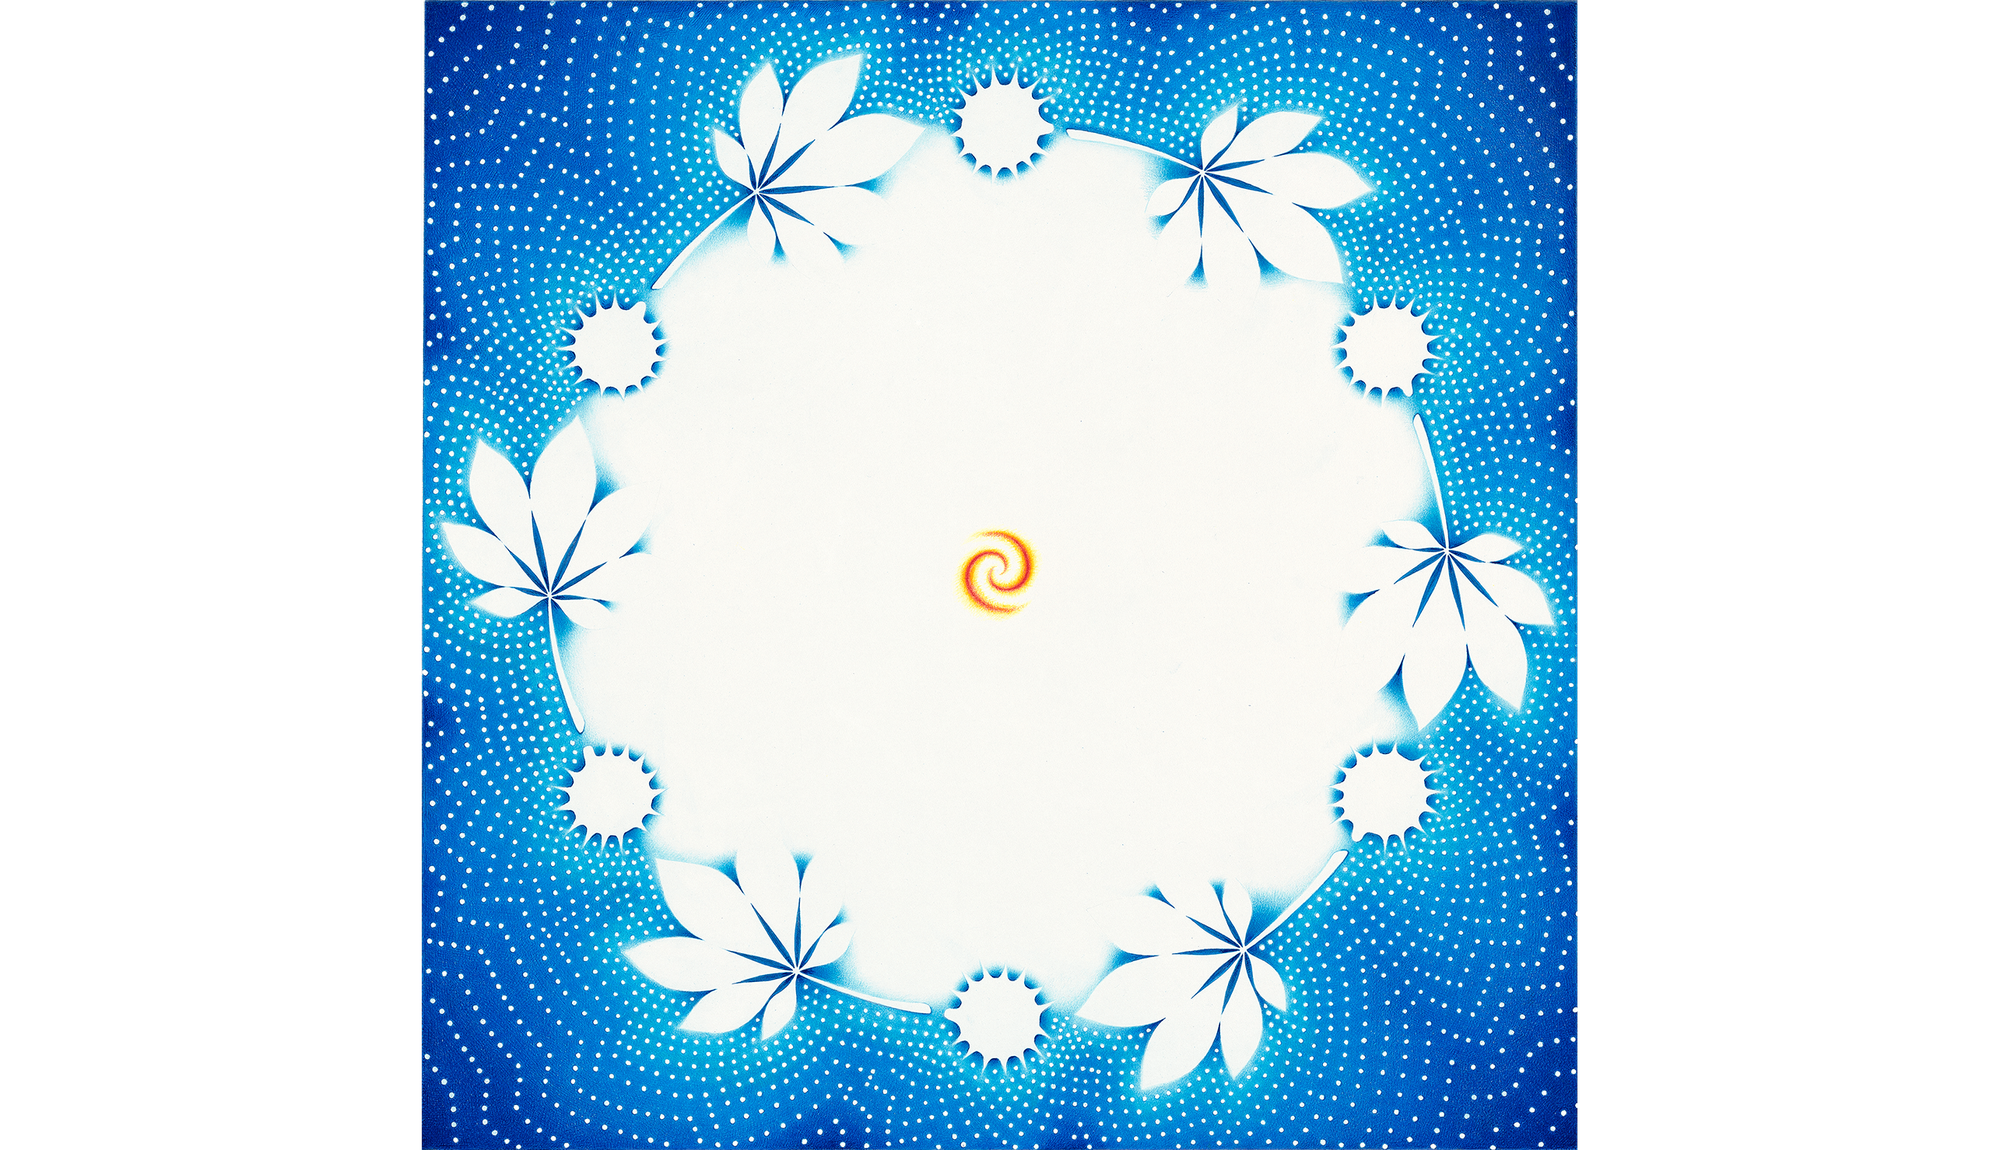 Painting of circular form on blue background with white stars.